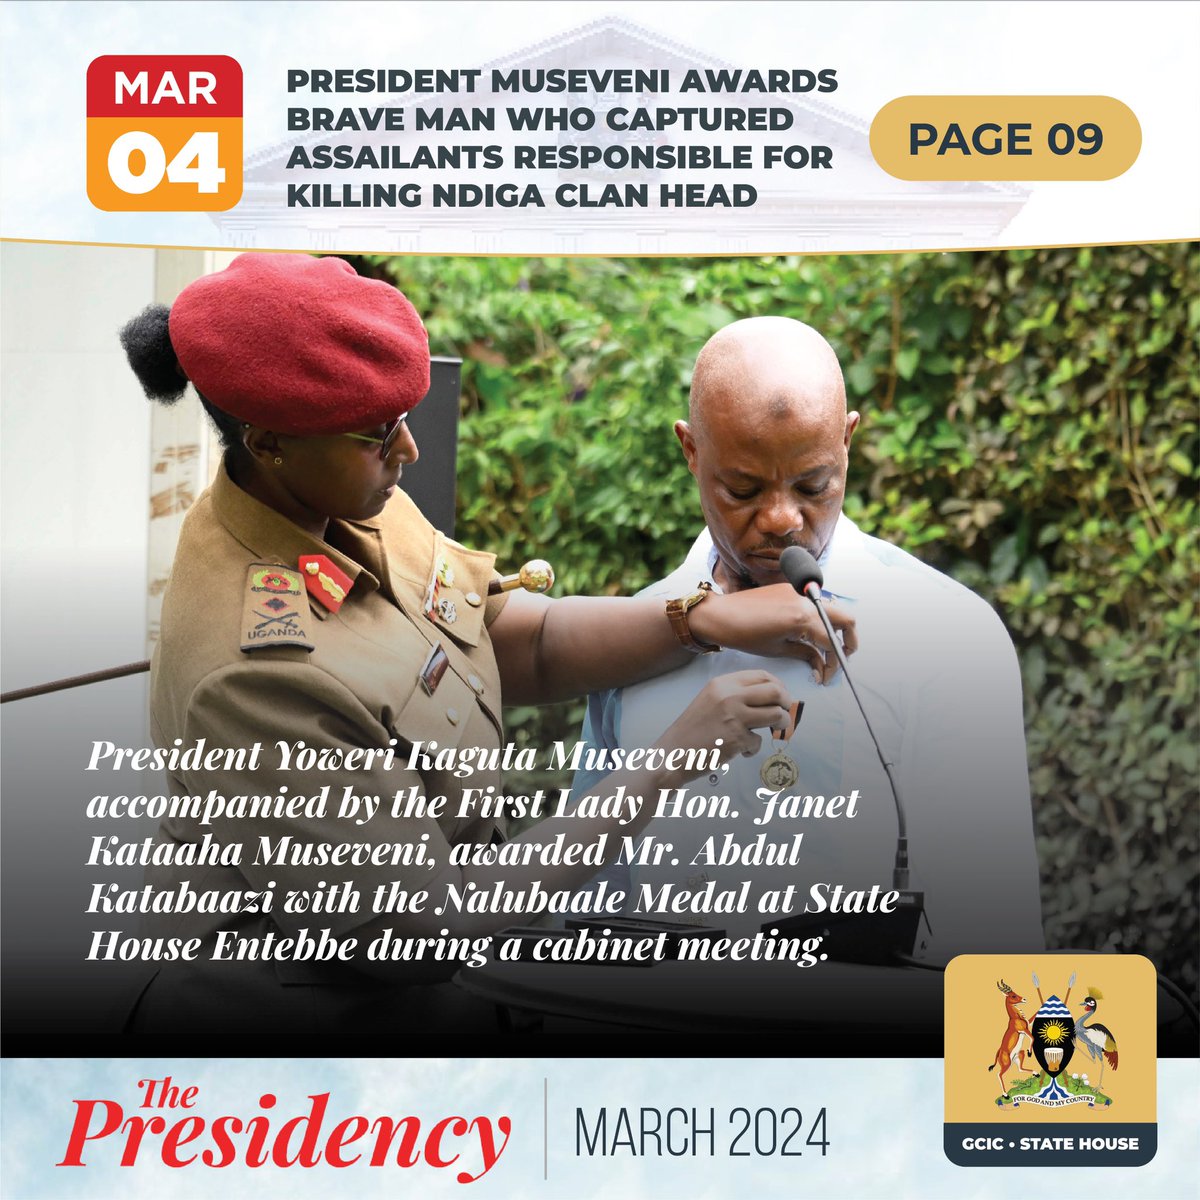 In this edition of the of #ThePresidencyUg is a story on how Katabaazi was decorated with the Nalubale Medal. Want to know who Katabaazi is? Read the full story on Page 09. #OpenGovUg